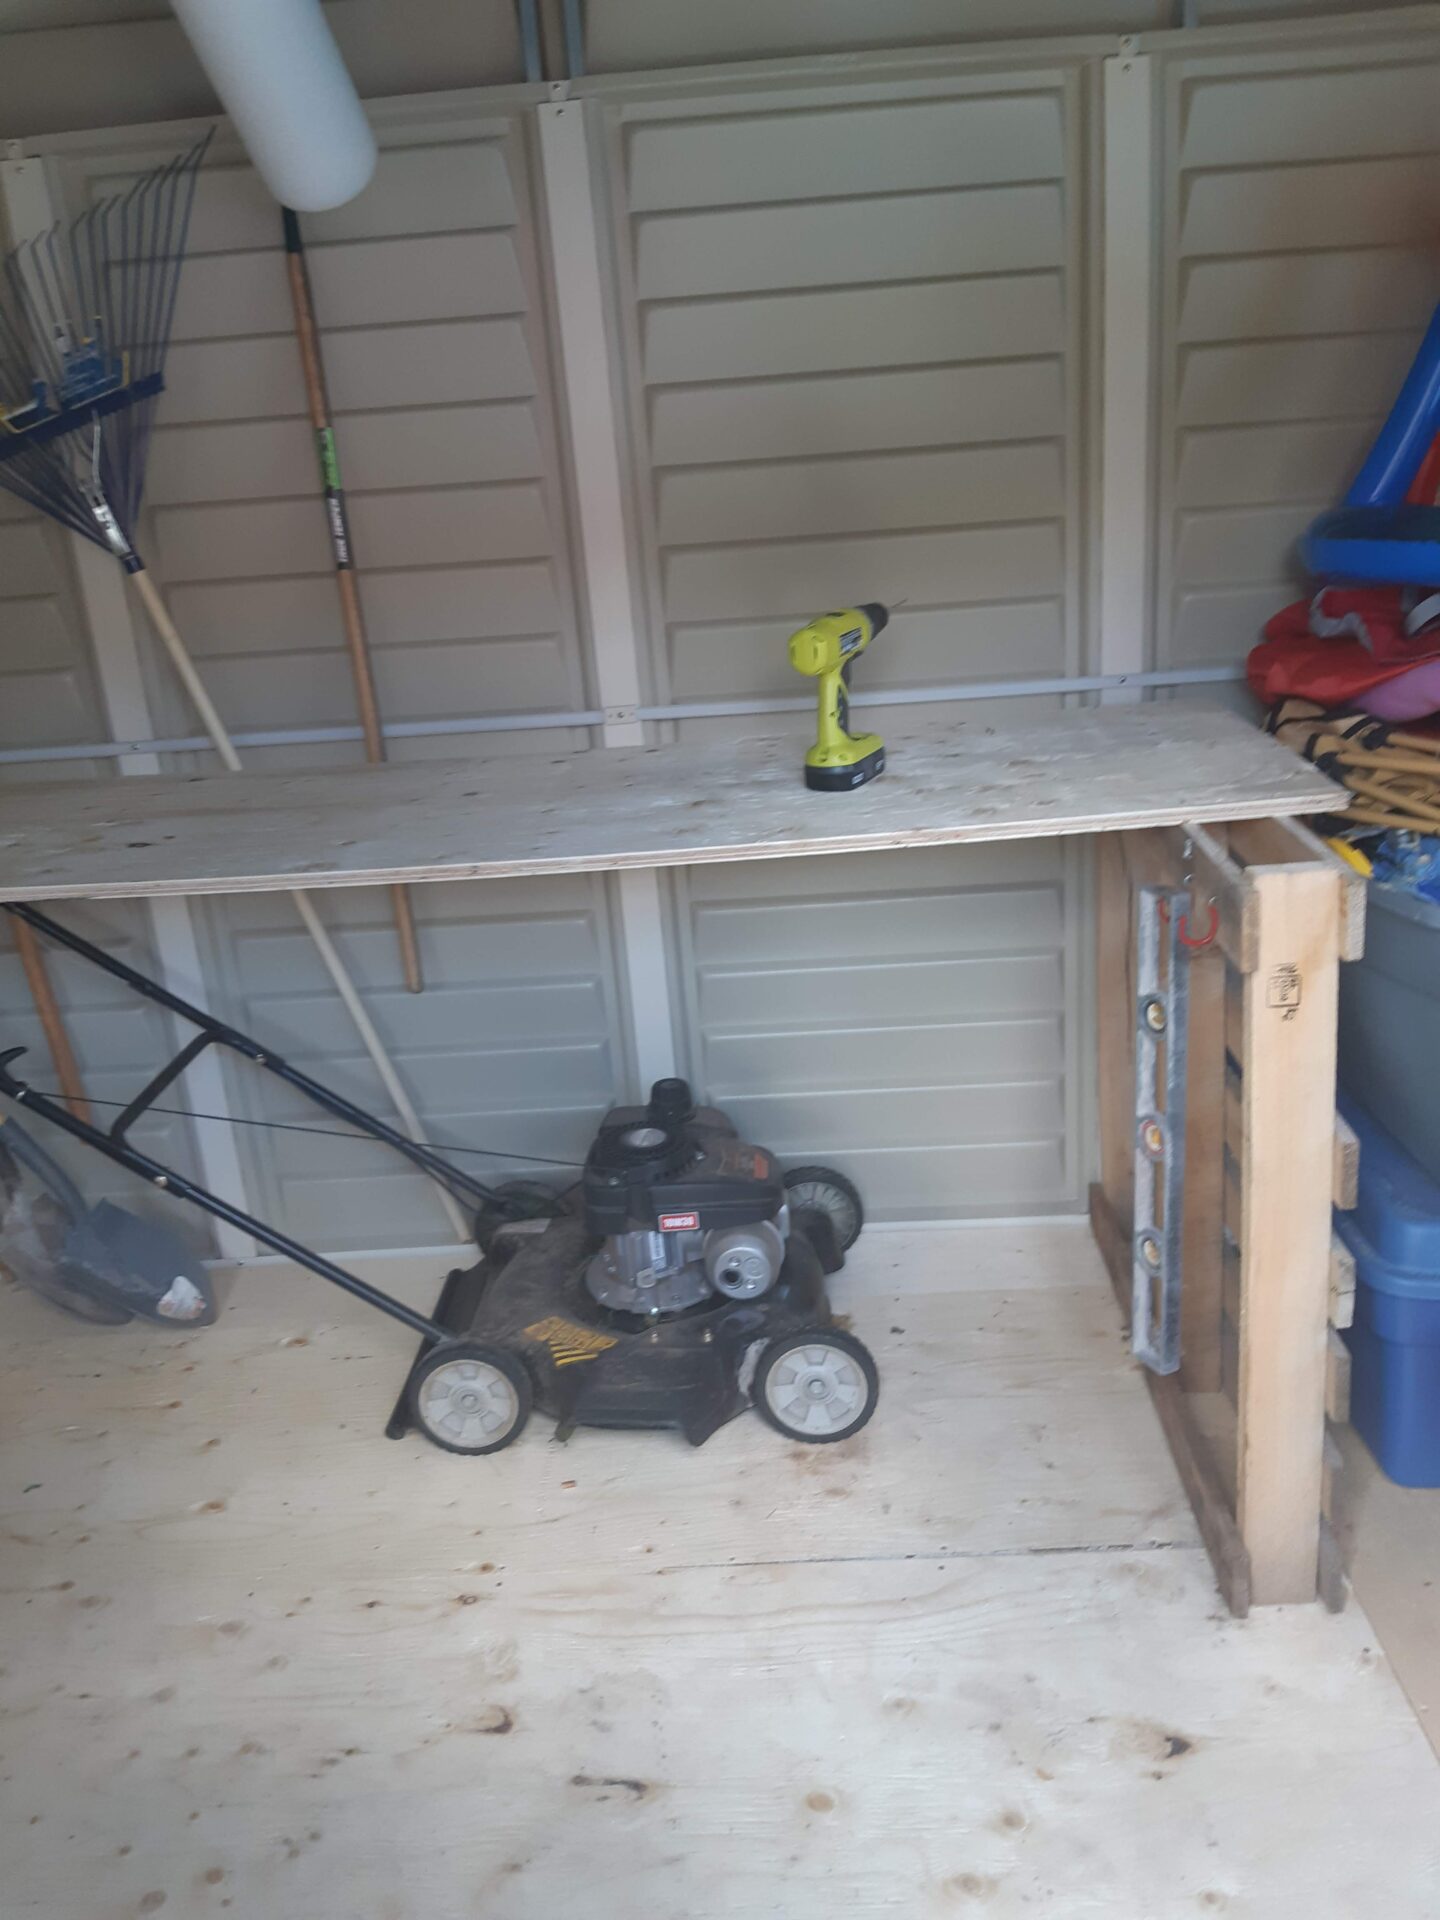 An image of a lawnmower in a shed as an example for a Lawnmower repair business number 75 on our list of backyard business ideas